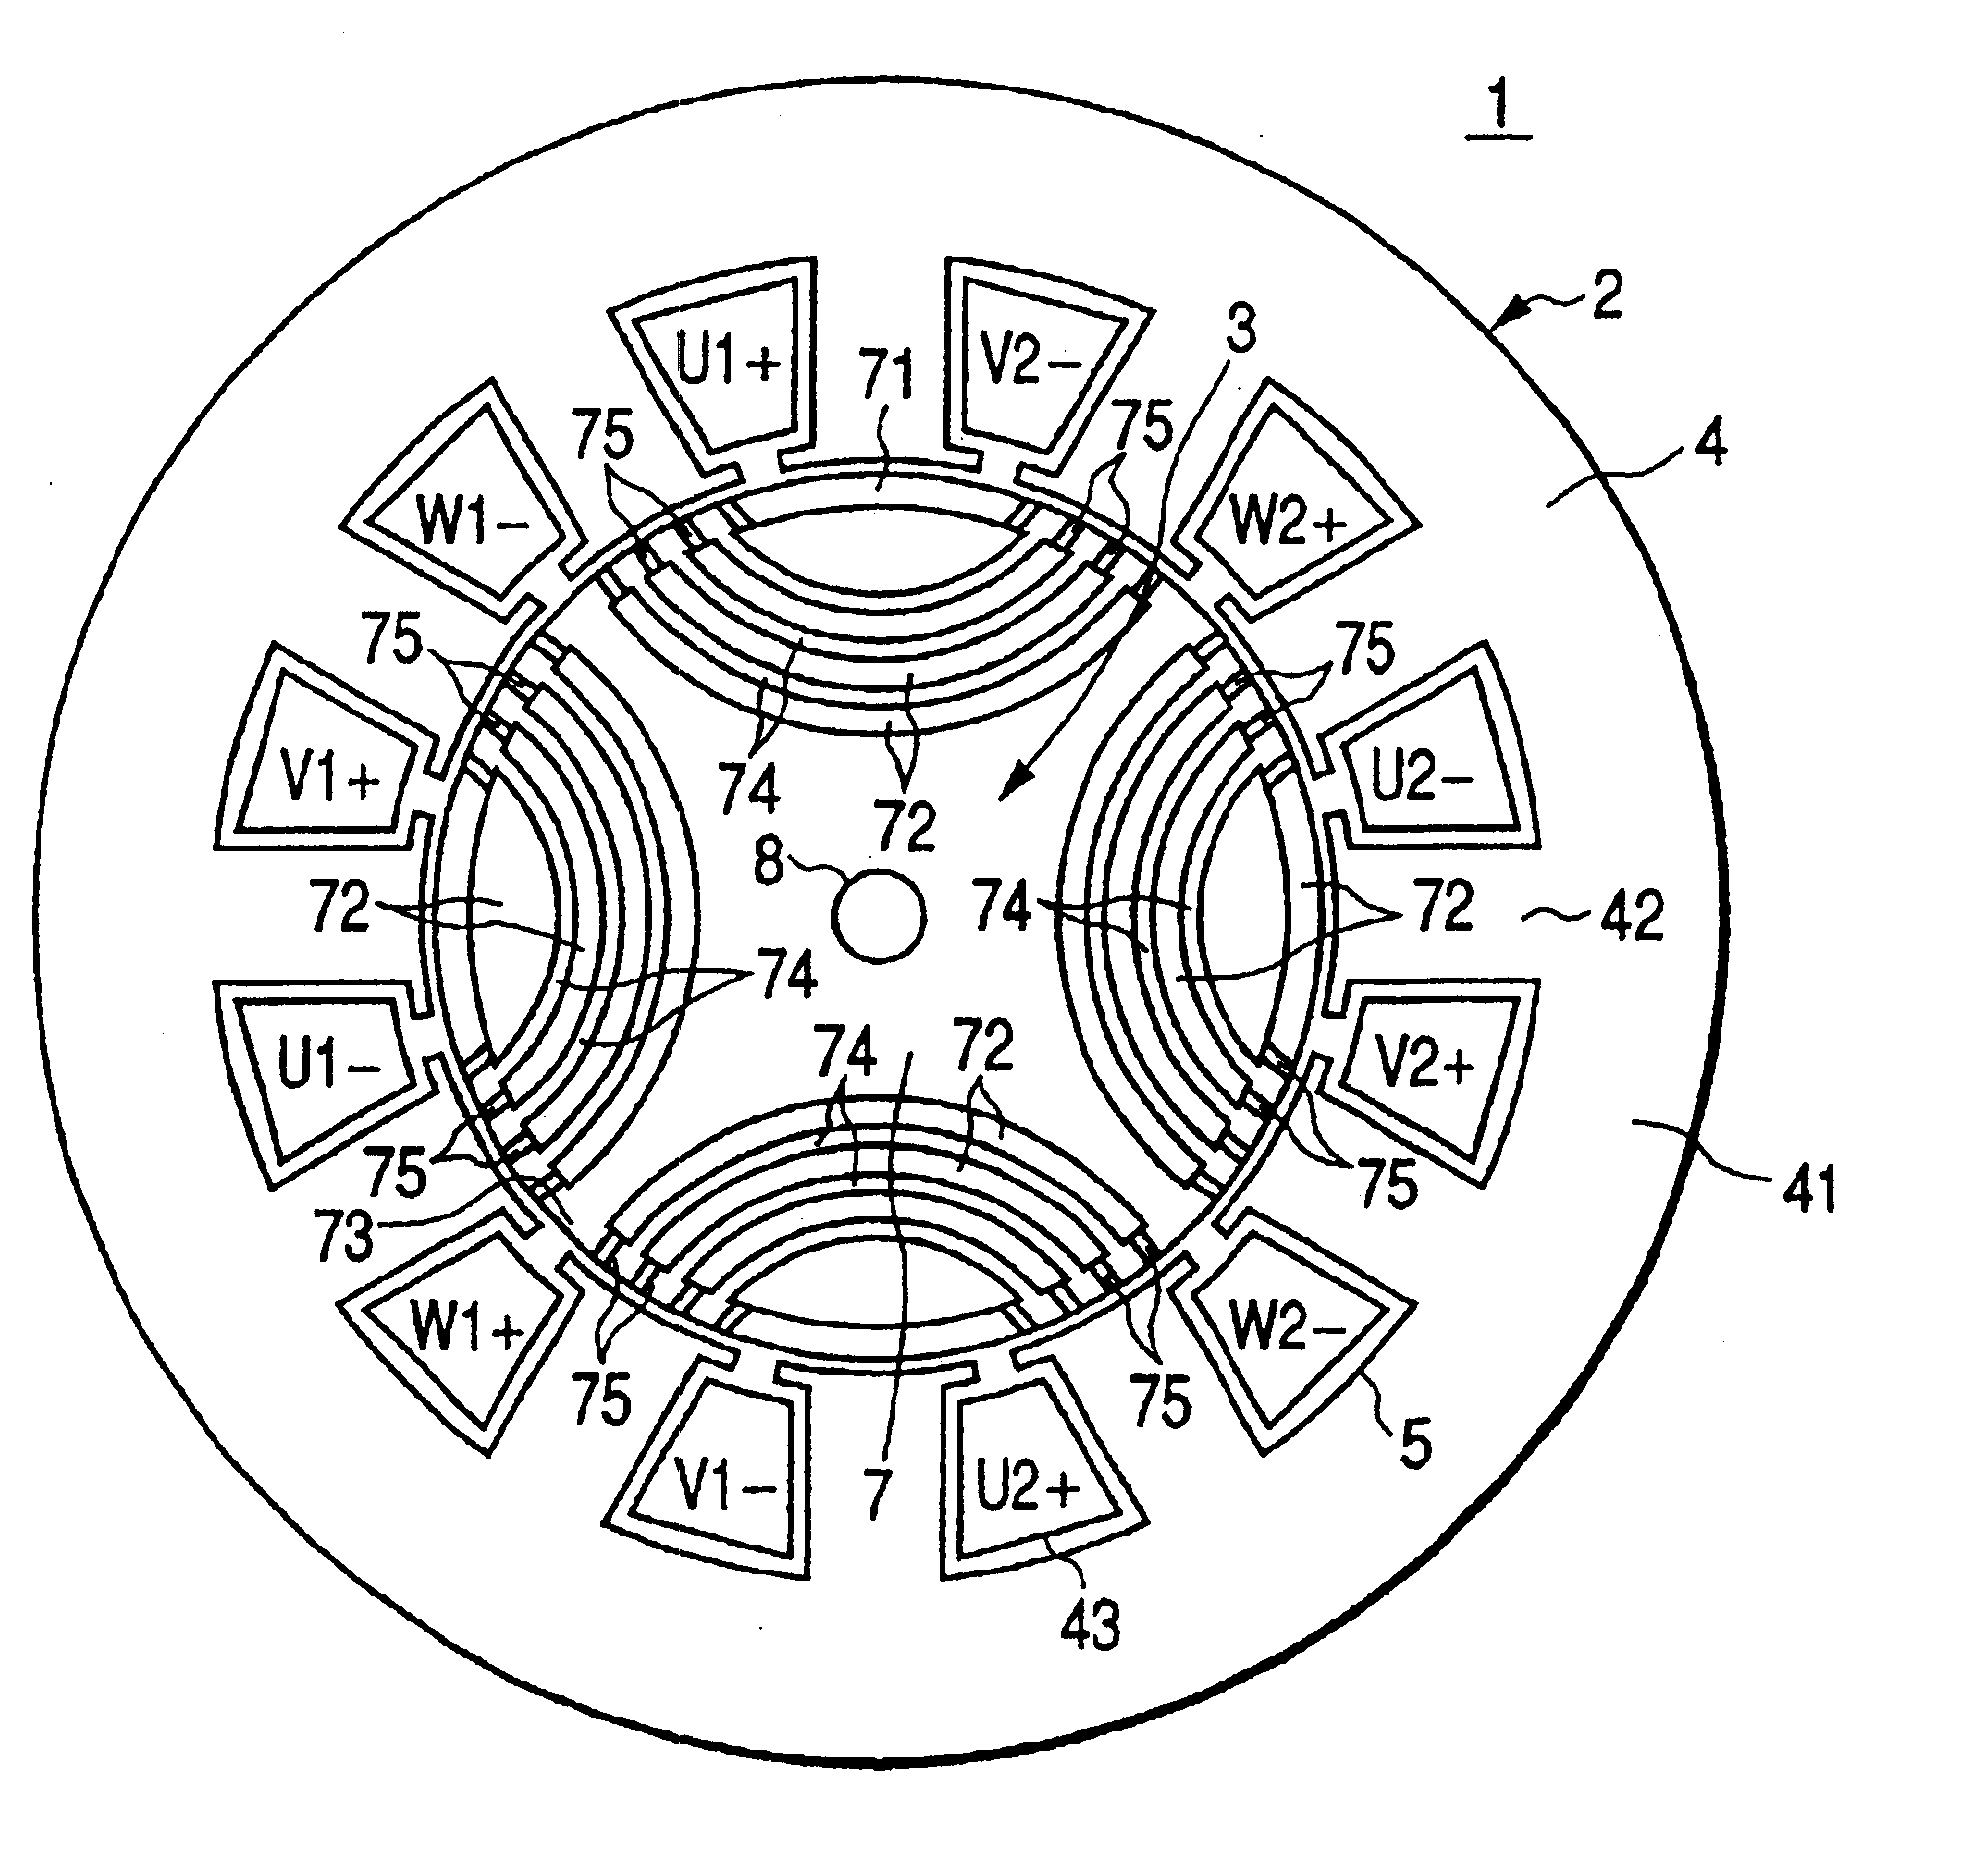 Rotary machine having bypath magnetic path blocking magnetic barrier